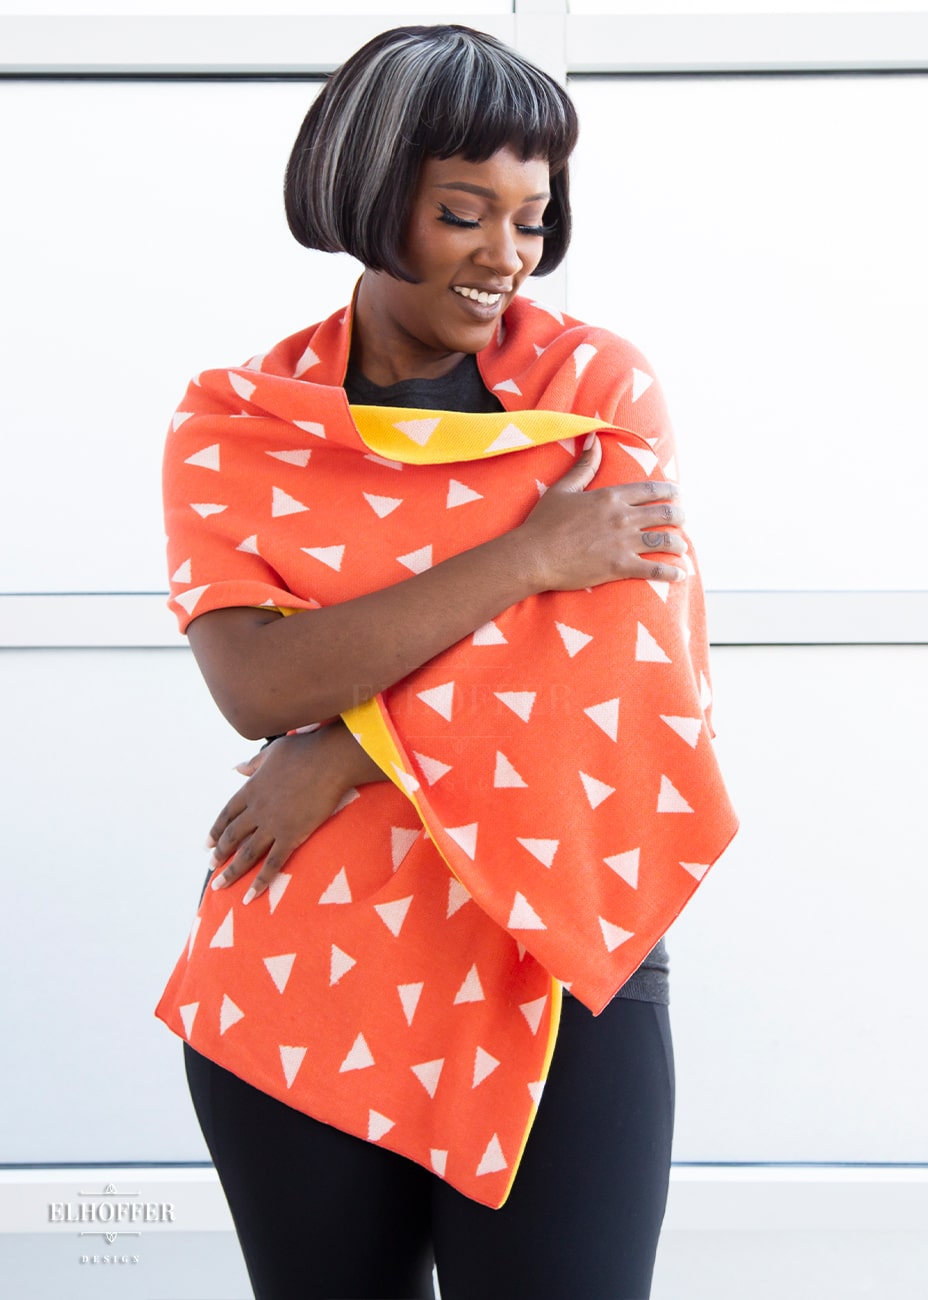 Lynsi, a medium dark skinned M model with short black and white hair, is smiling while wrapped up in a reversible knit scarf.  One side of the scarf is orange with white triangles and the other side is yellow with white triangles.